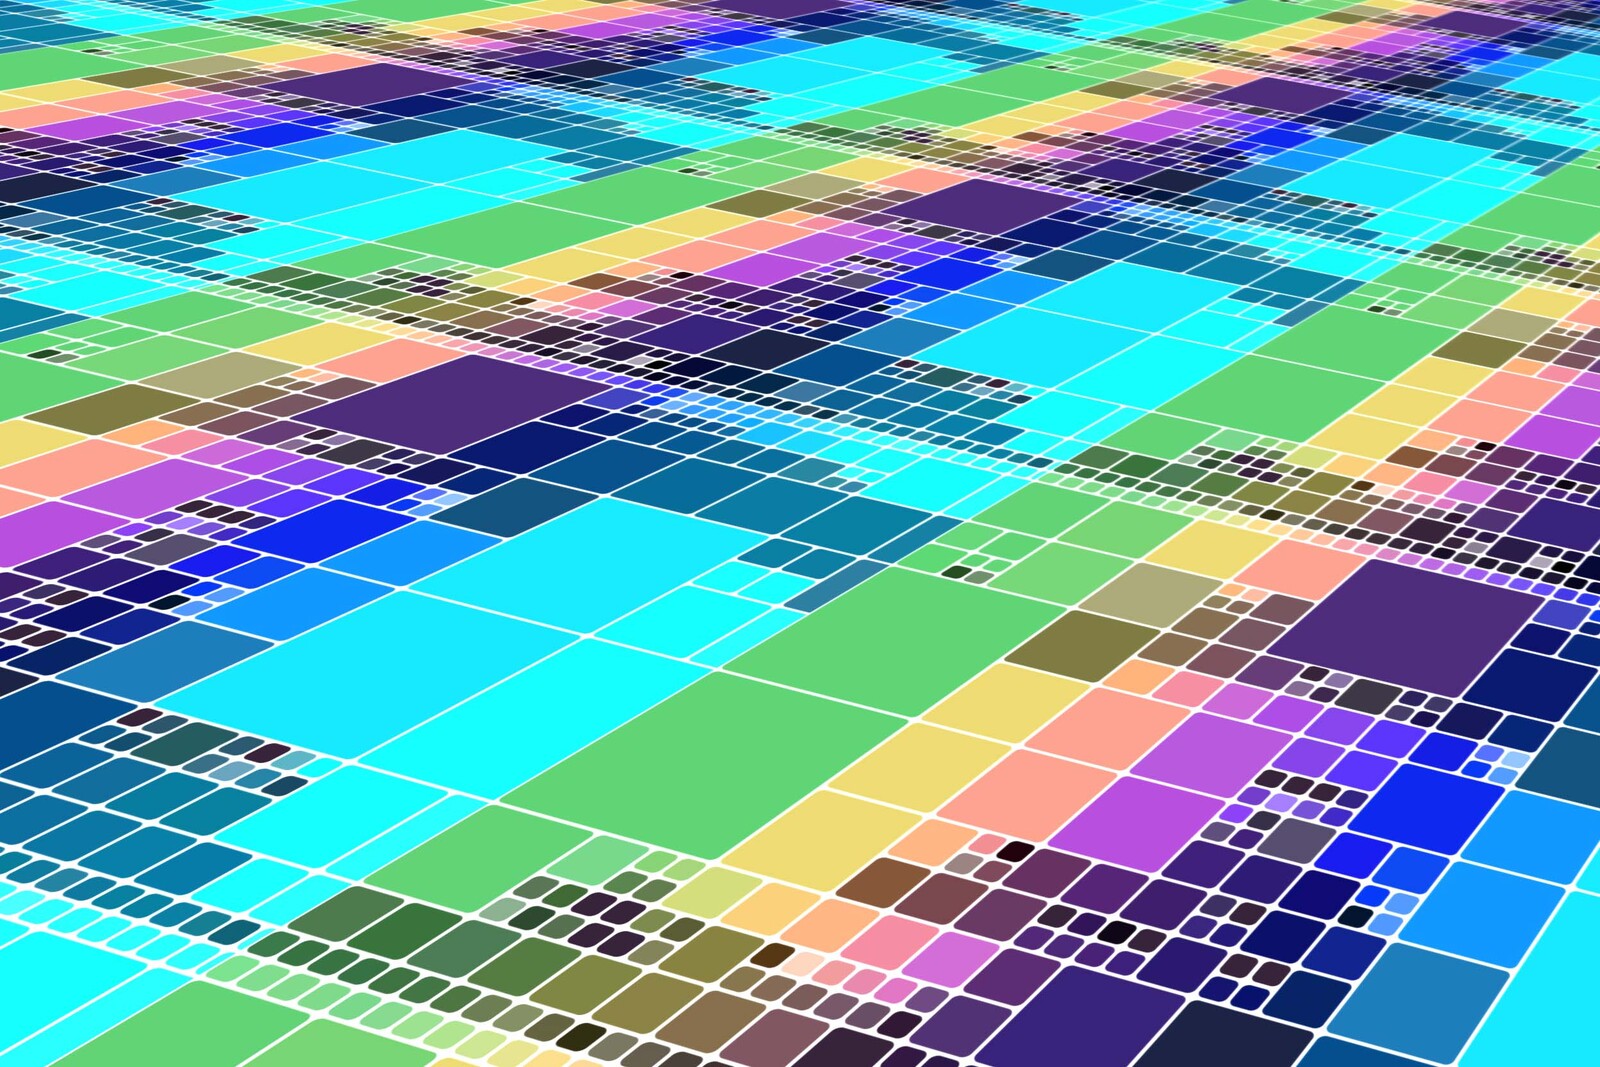 abstract image with colourful squares